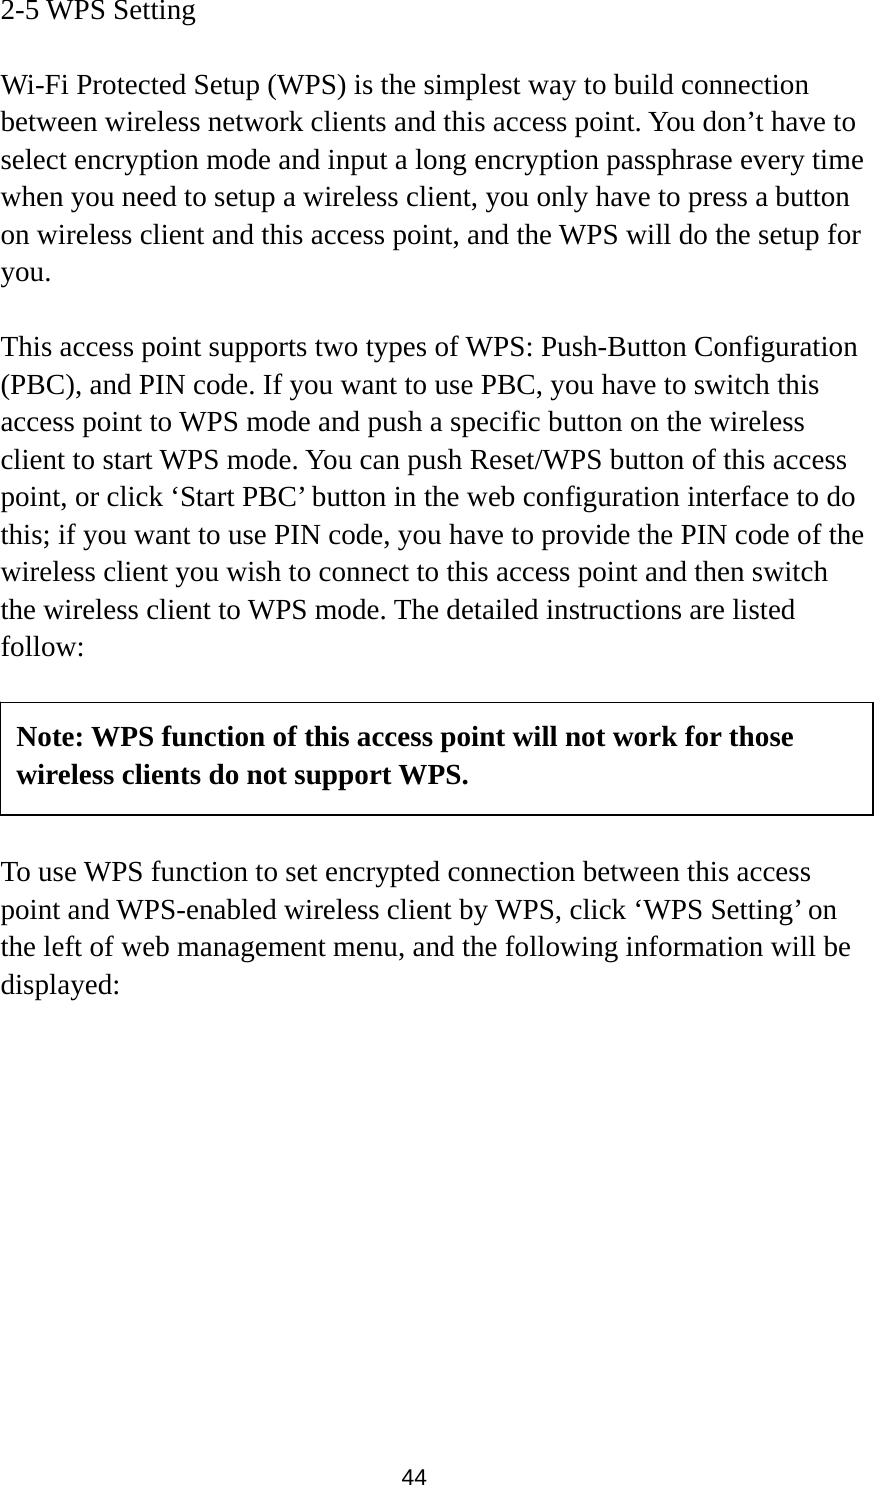 44 2-5 WPS Setting  Wi-Fi Protected Setup (WPS) is the simplest way to build connection between wireless network clients and this access point. You don’t have to select encryption mode and input a long encryption passphrase every time when you need to setup a wireless client, you only have to press a button on wireless client and this access point, and the WPS will do the setup for you.  This access point supports two types of WPS: Push-Button Configuration (PBC), and PIN code. If you want to use PBC, you have to switch this access point to WPS mode and push a specific button on the wireless client to start WPS mode. You can push Reset/WPS button of this access point, or click ‘Start PBC’ button in the web configuration interface to do this; if you want to use PIN code, you have to provide the PIN code of the wireless client you wish to connect to this access point and then switch the wireless client to WPS mode. The detailed instructions are listed follow:      To use WPS function to set encrypted connection between this access point and WPS-enabled wireless client by WPS, click ‘WPS Setting’ on the left of web management menu, and the following information will be displayed:  Note: WPS function of this access point will not work for those wireless clients do not support WPS. 